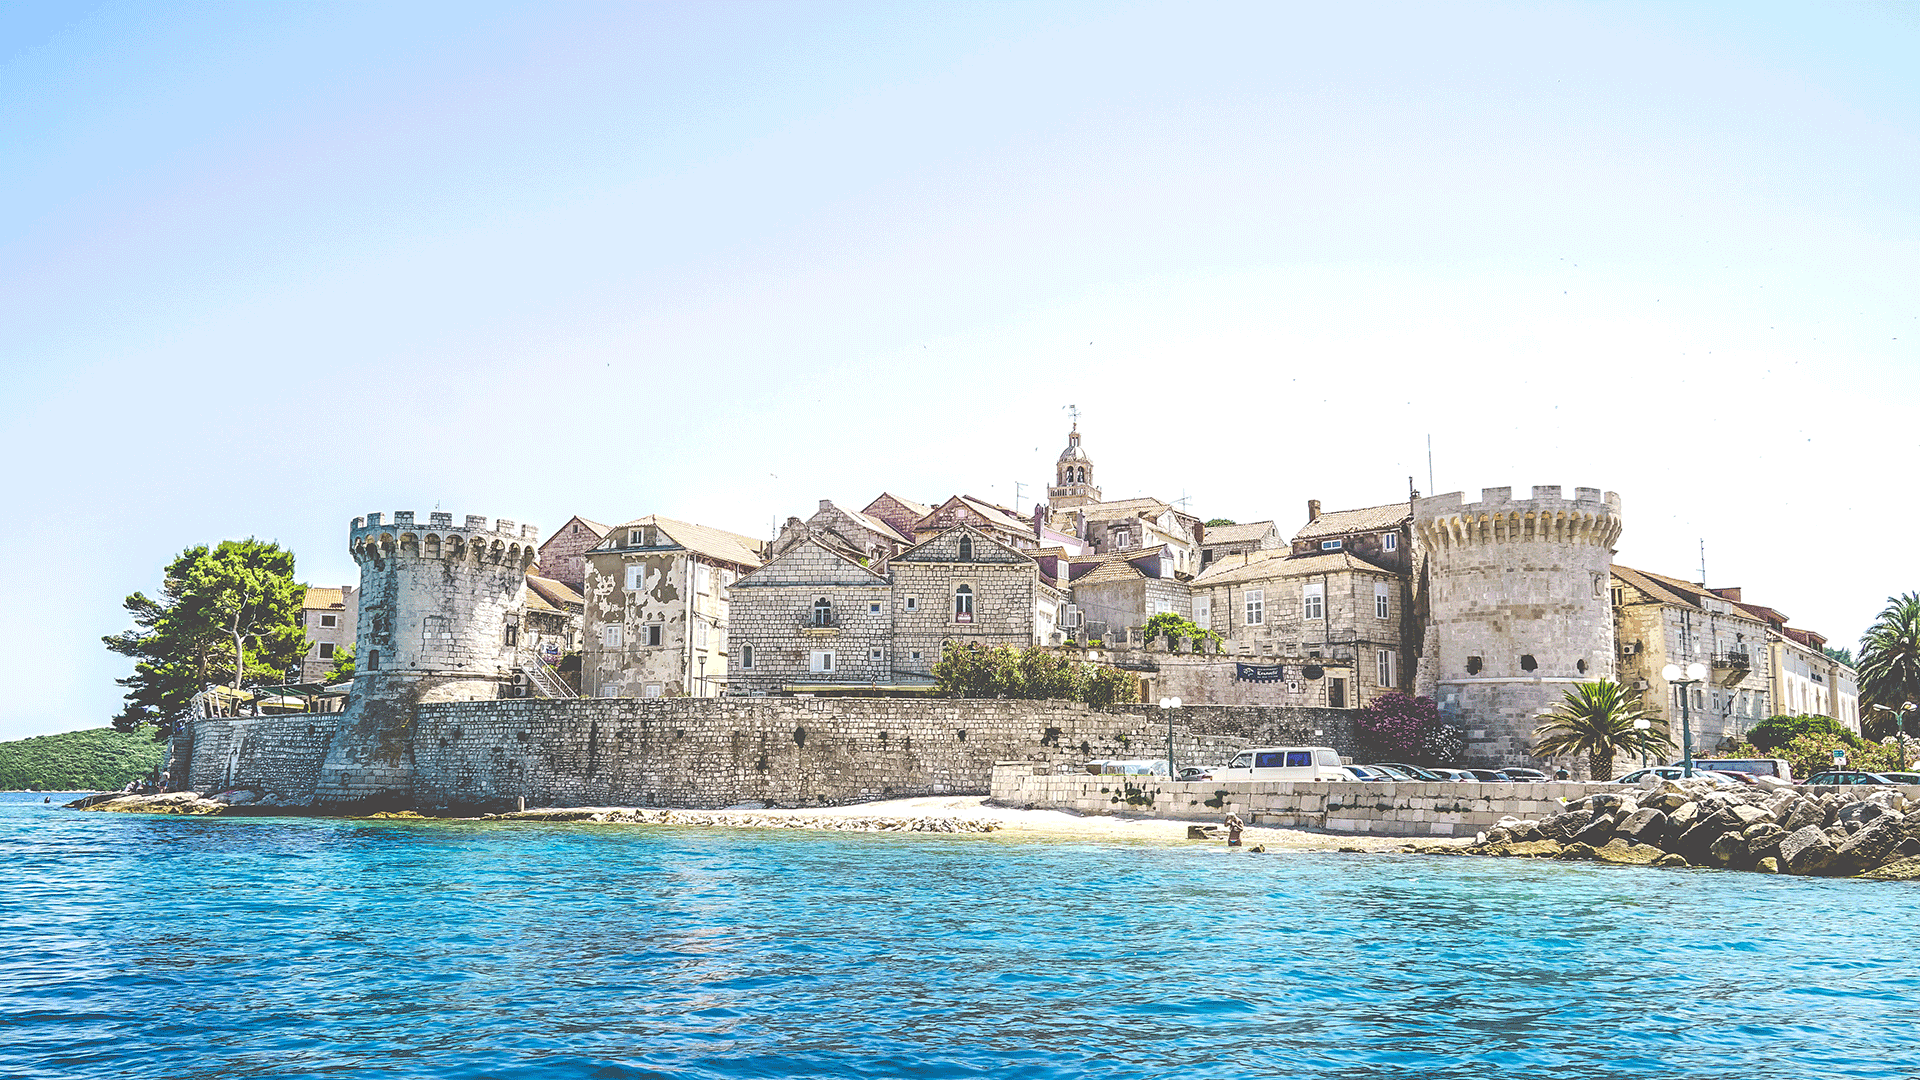 Old Town Korcula from the water